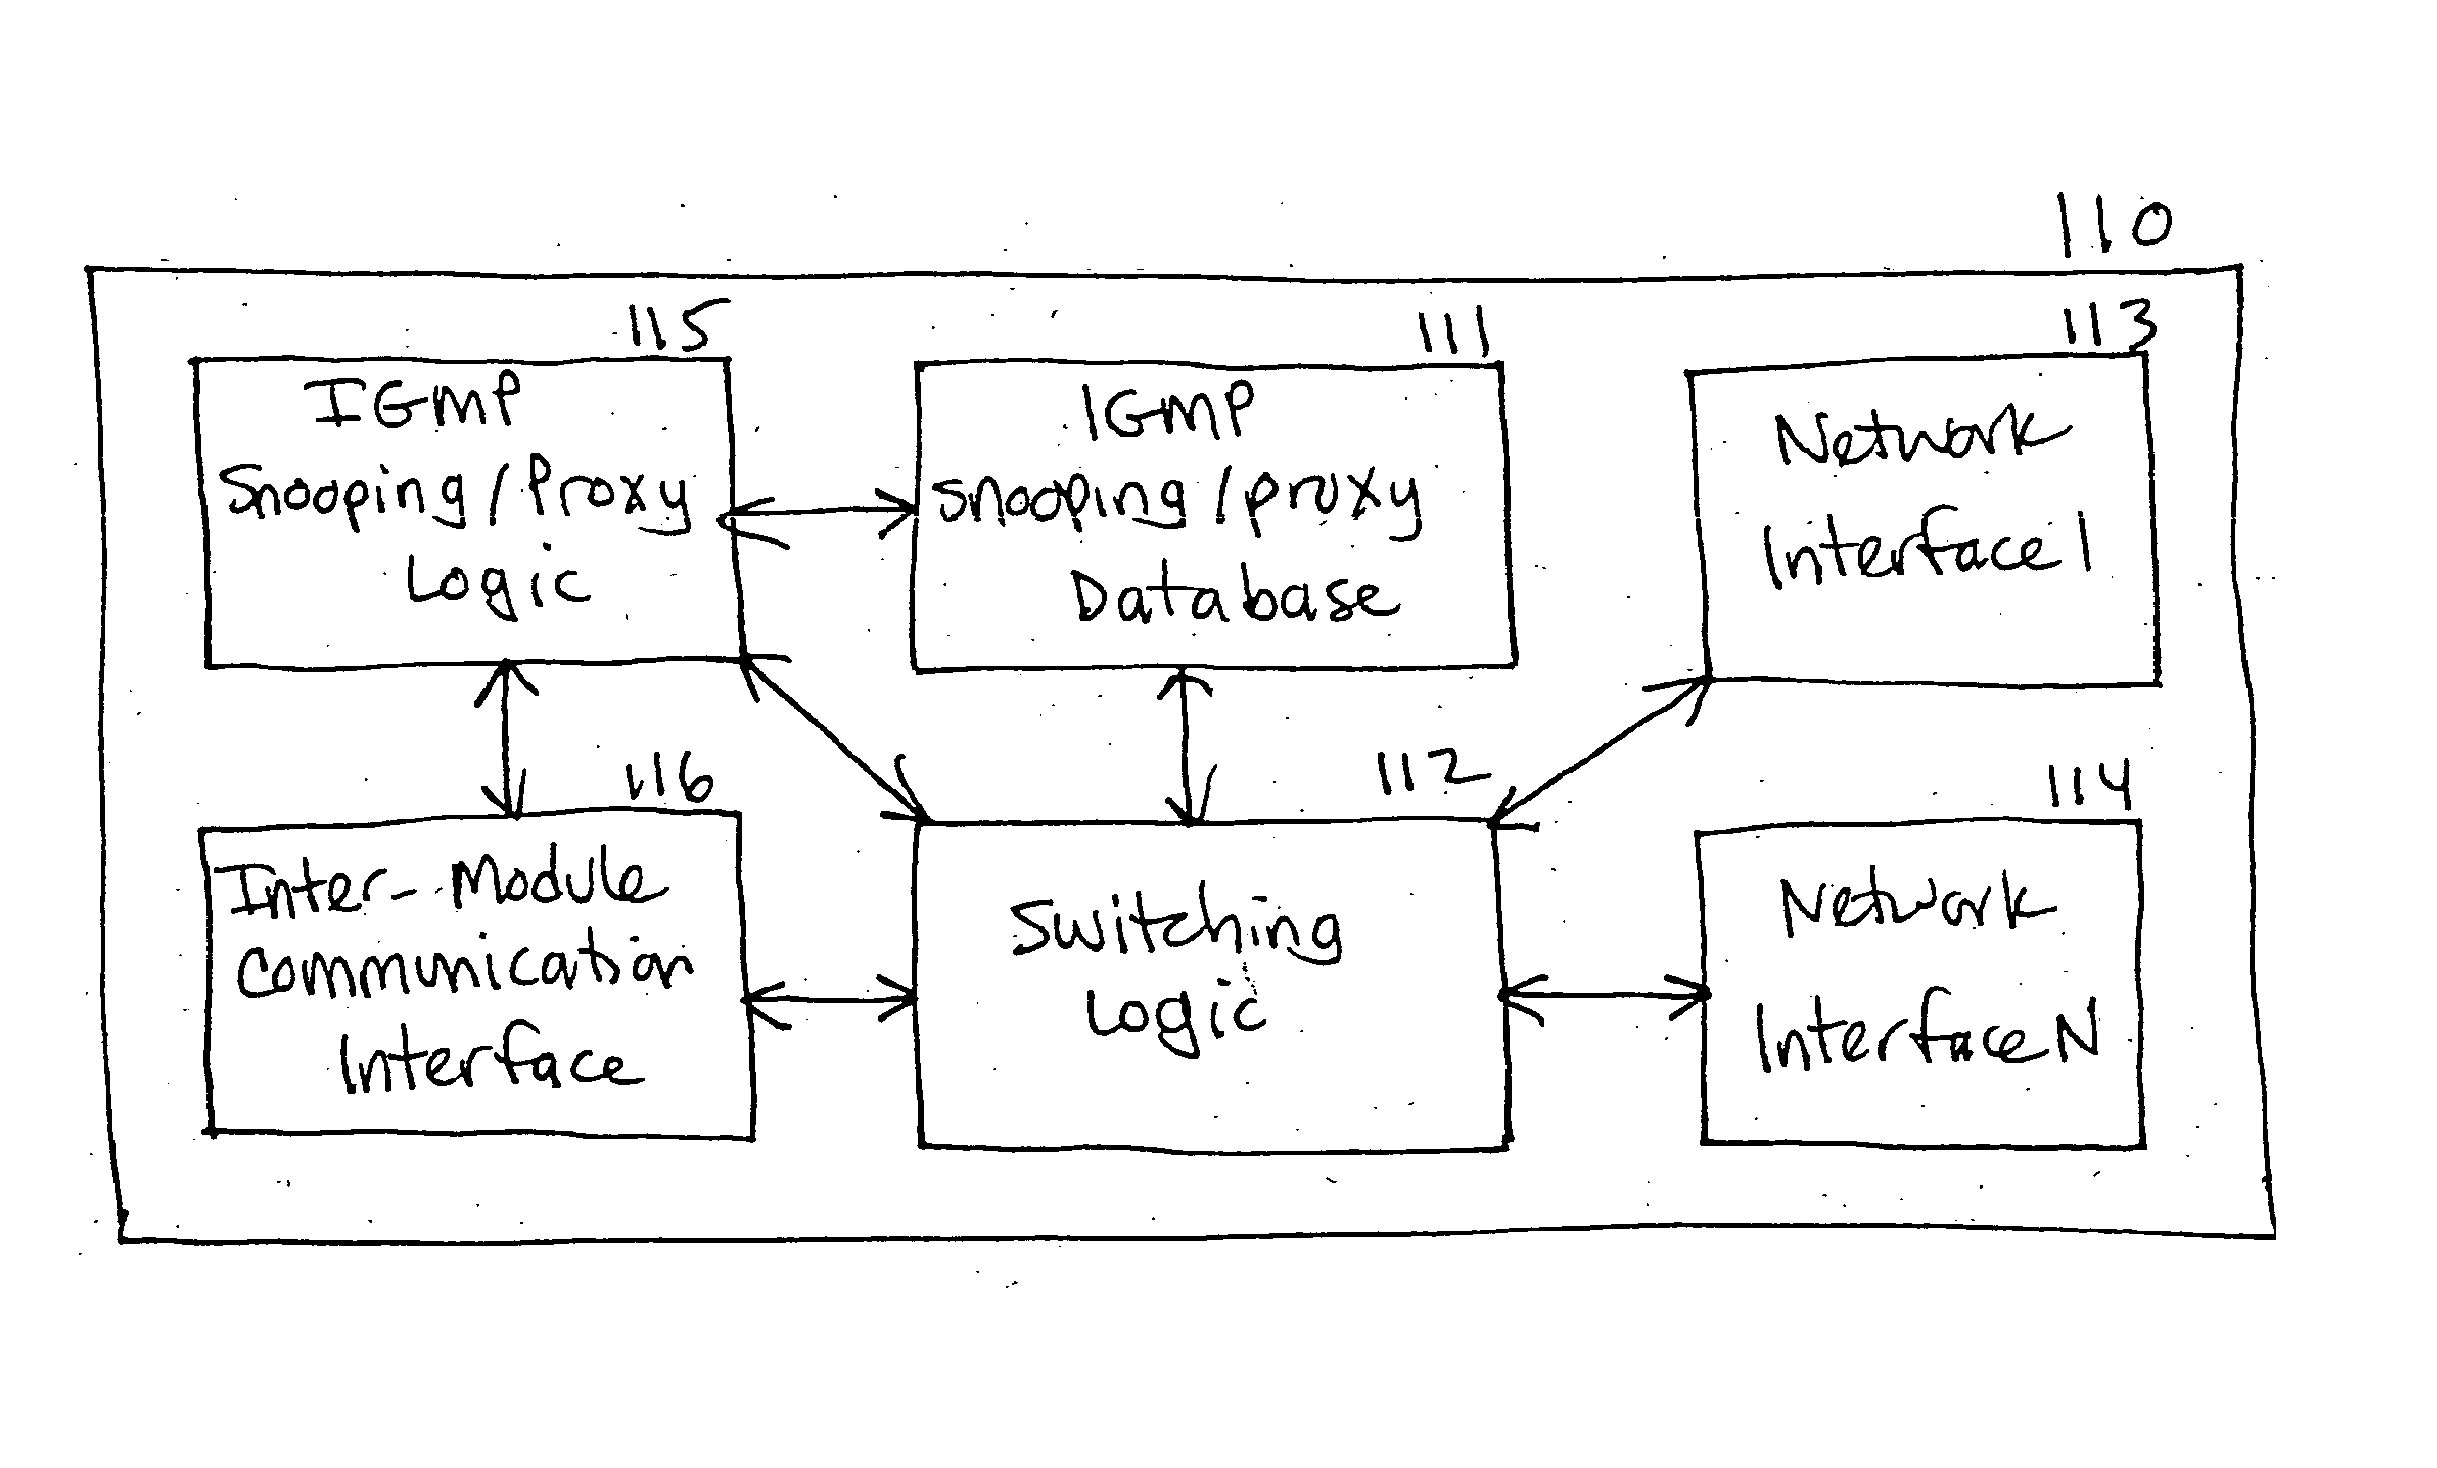 Multicast switching in a distributed communication system